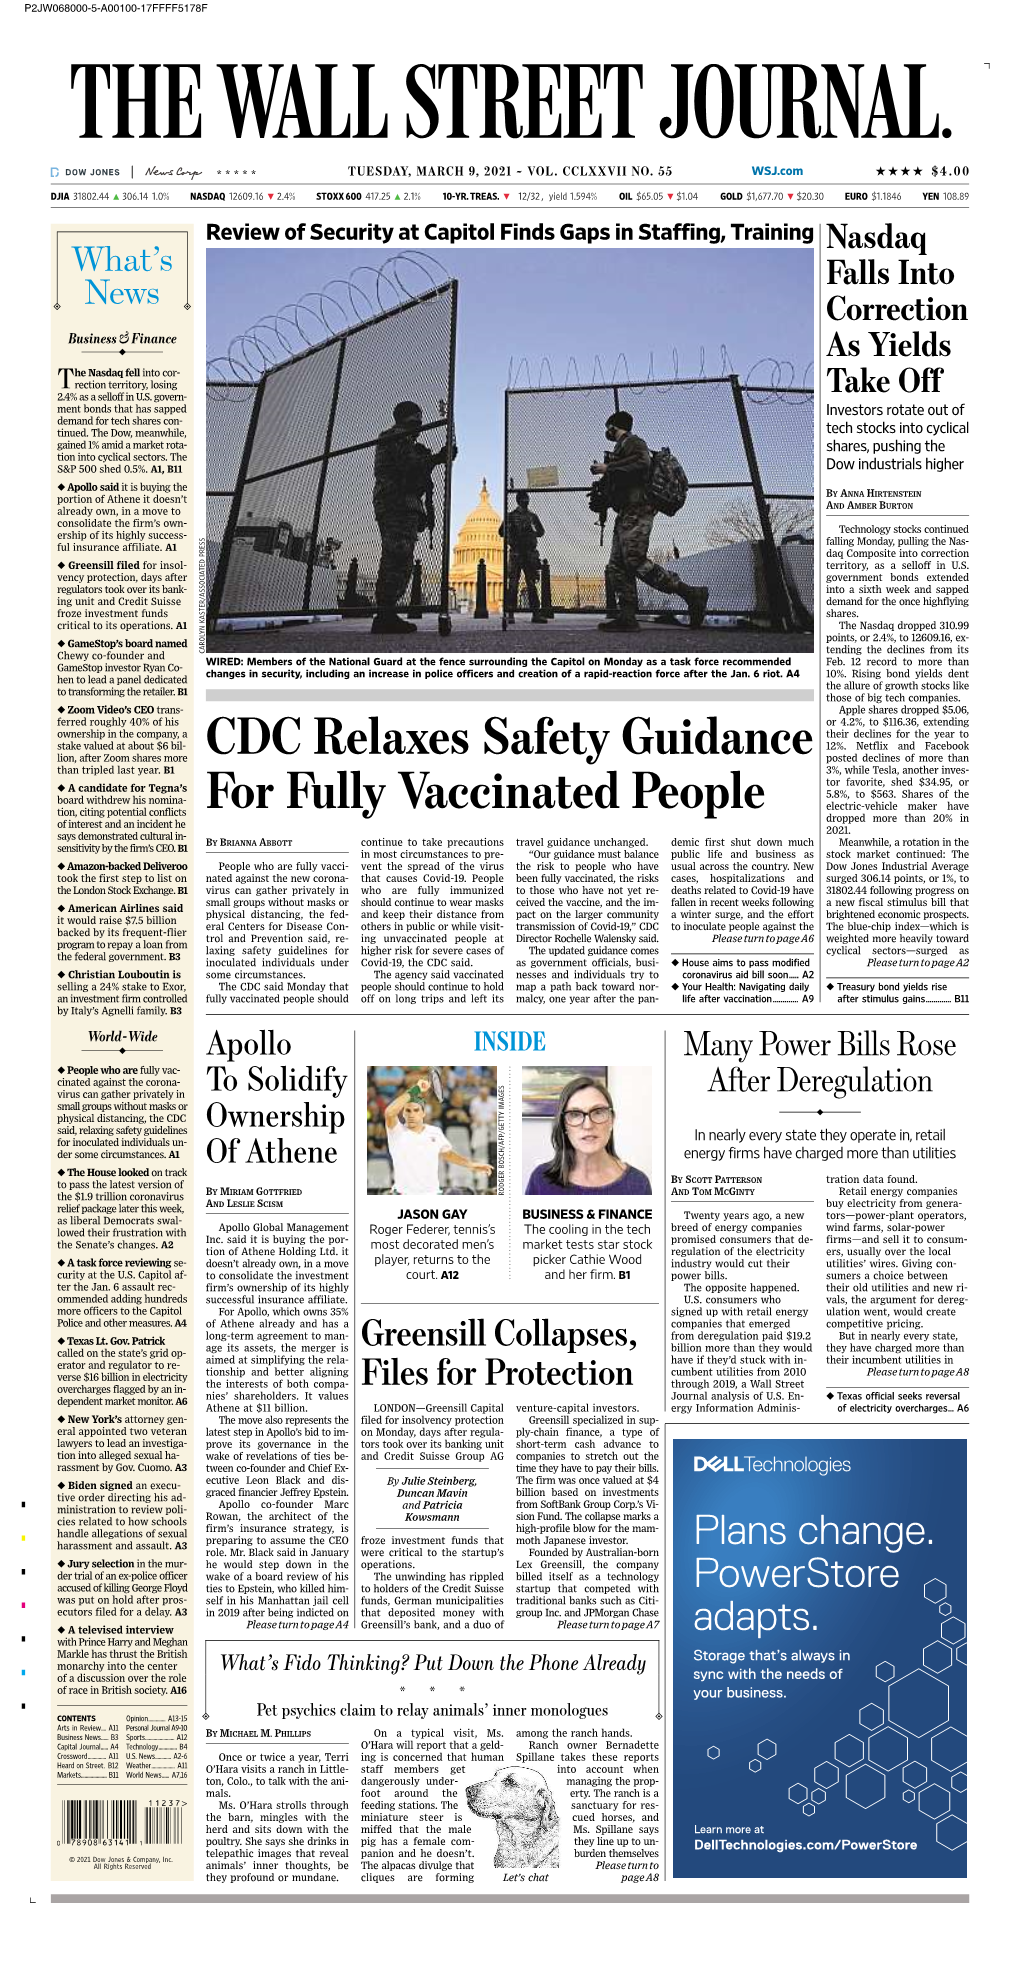 CDC Relaxes Safety Guidance for Fully Vaccinated People